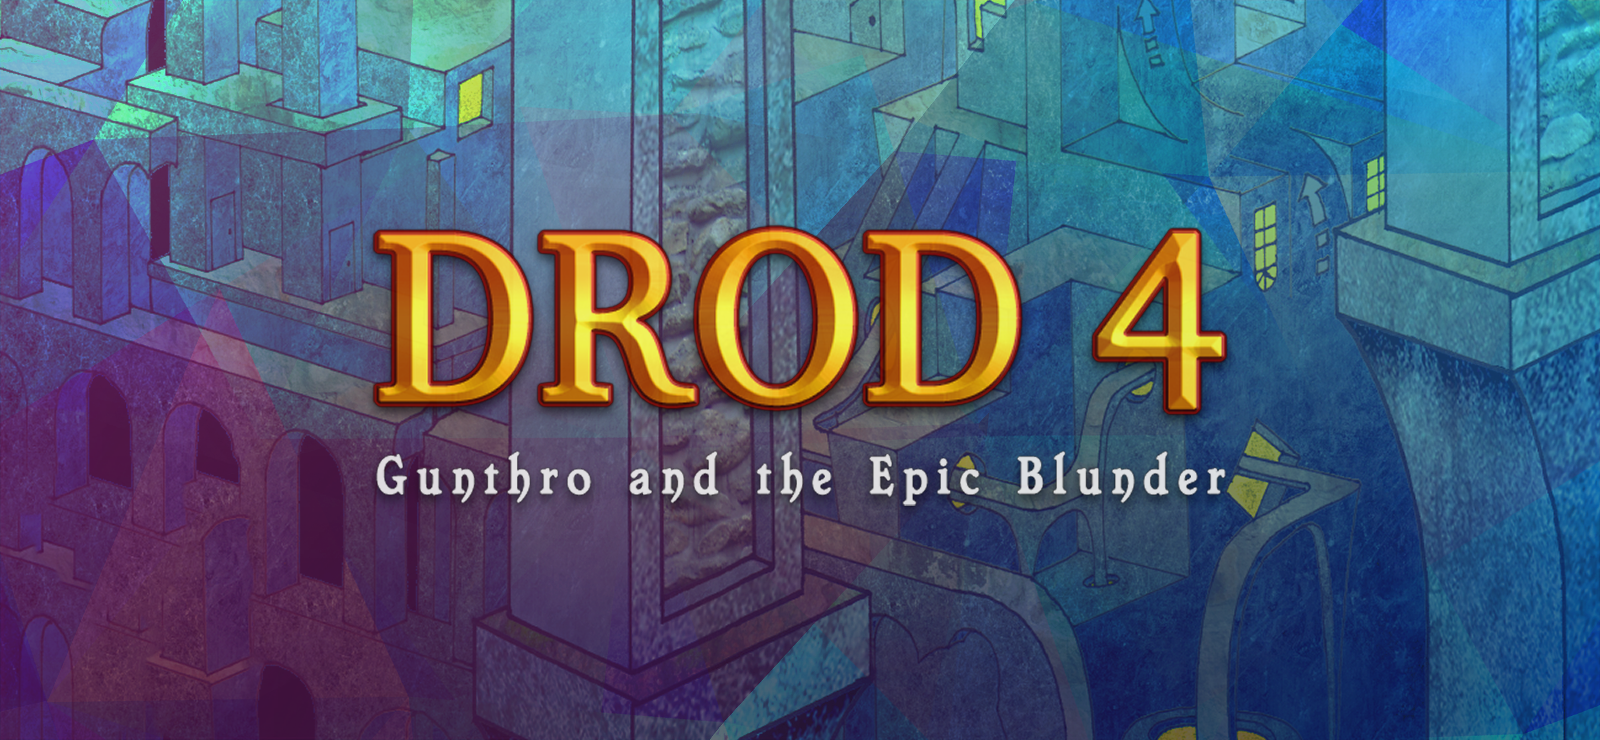 DROD 4: Gunthro And The Epic Blunder